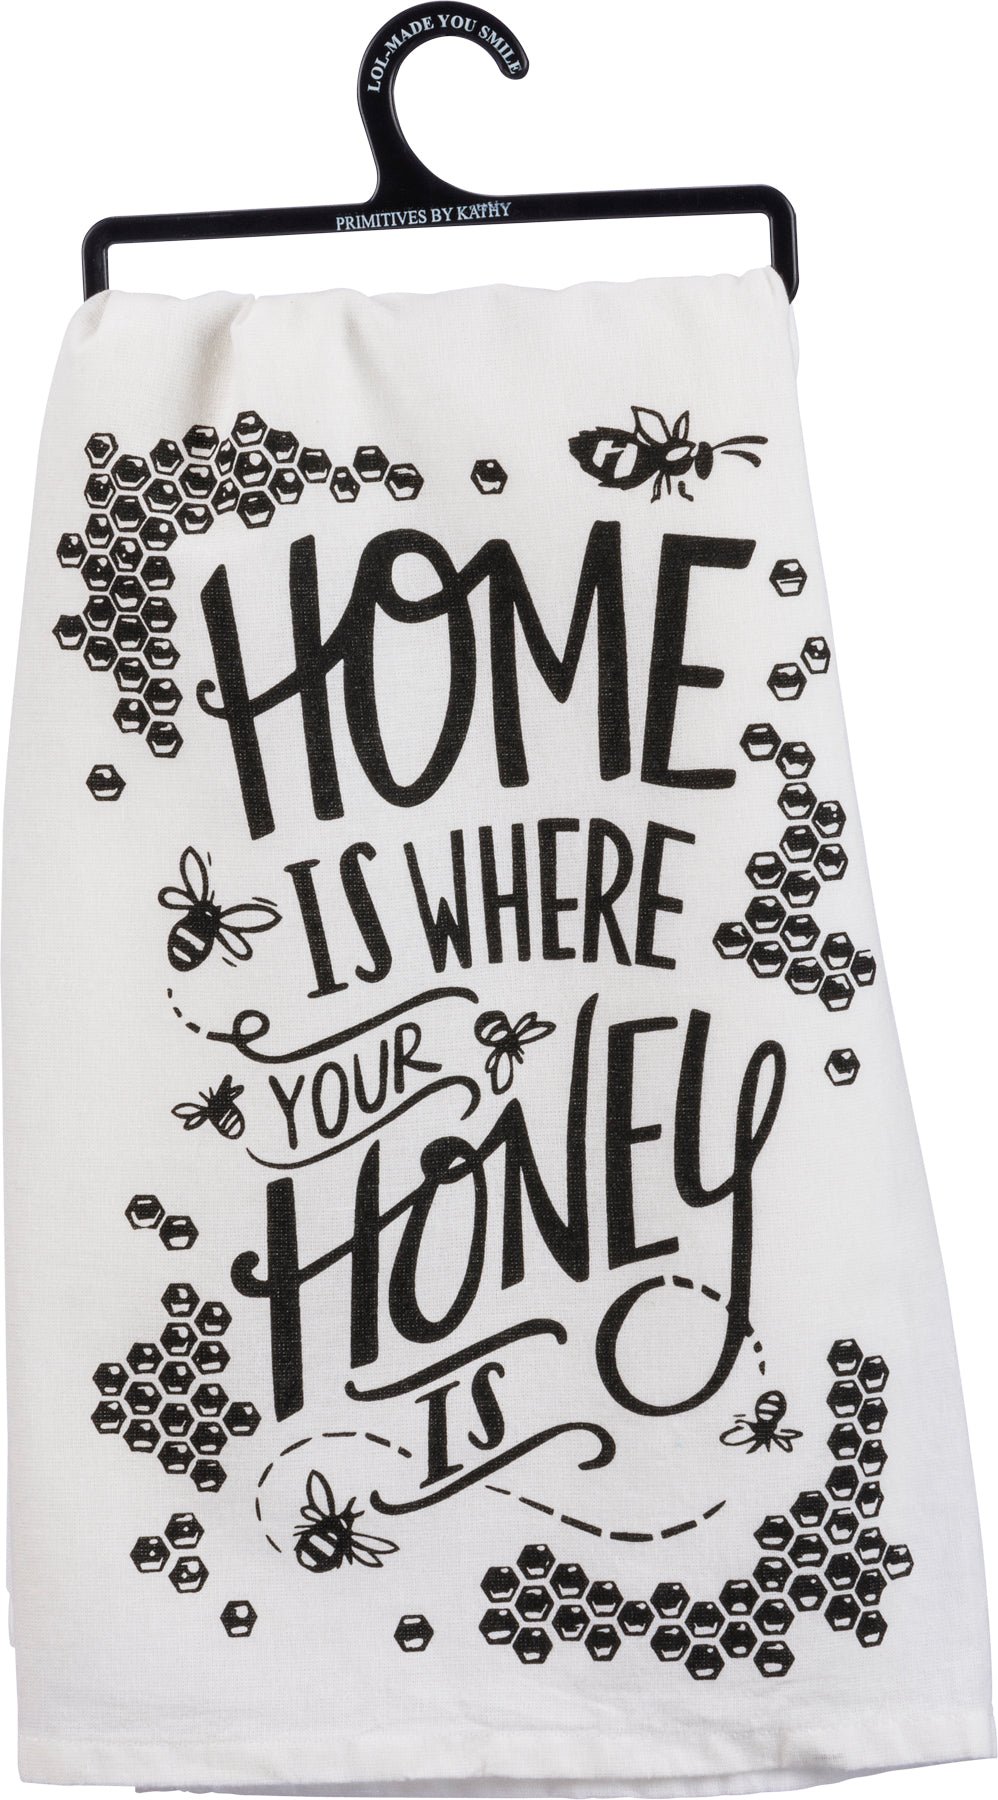 Towel - Home Is Where Your Honey Is